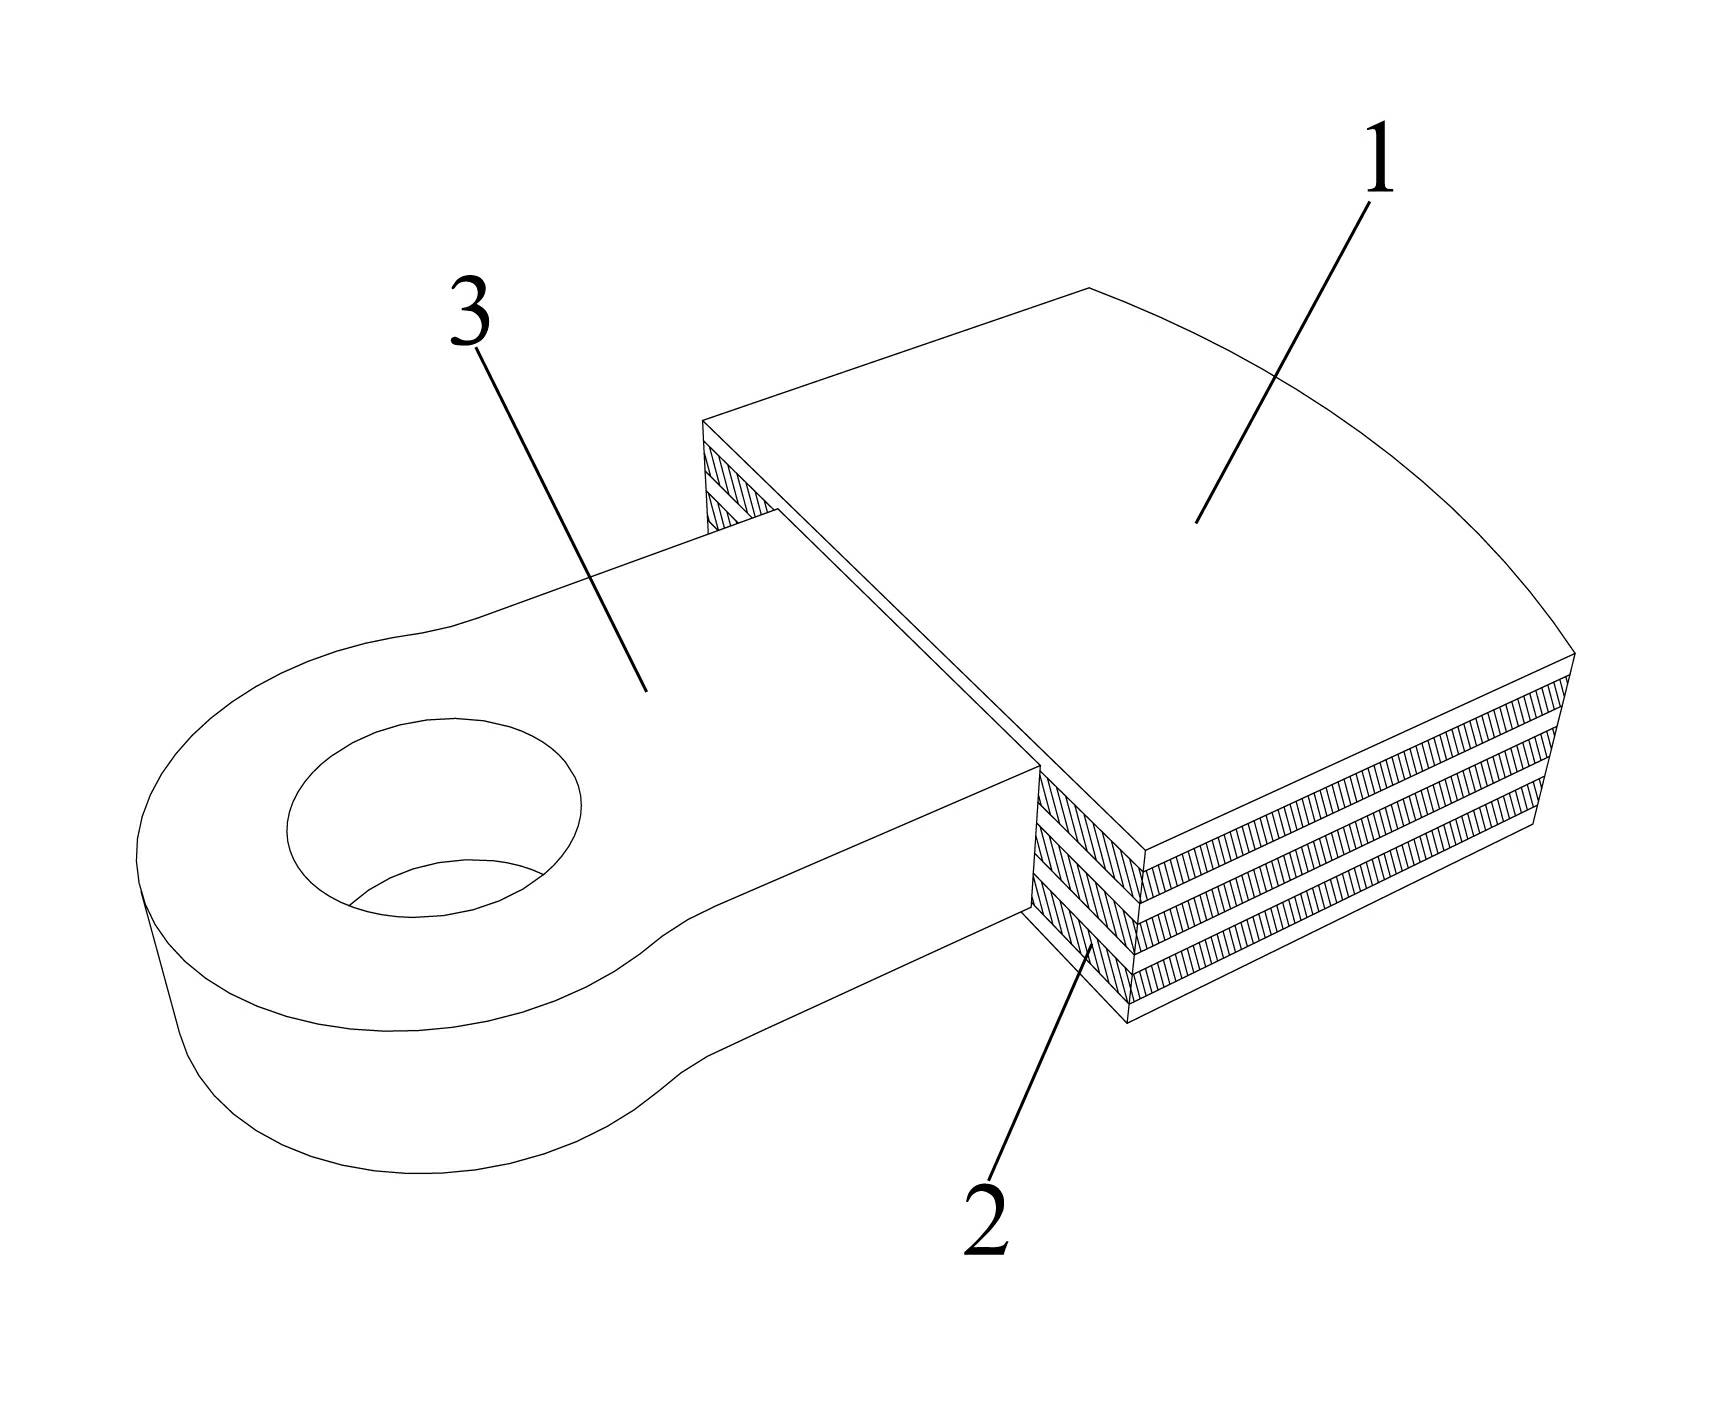 Method of in situ synthetic steel bond hard alloy casting composite hammerhead and hammerhead